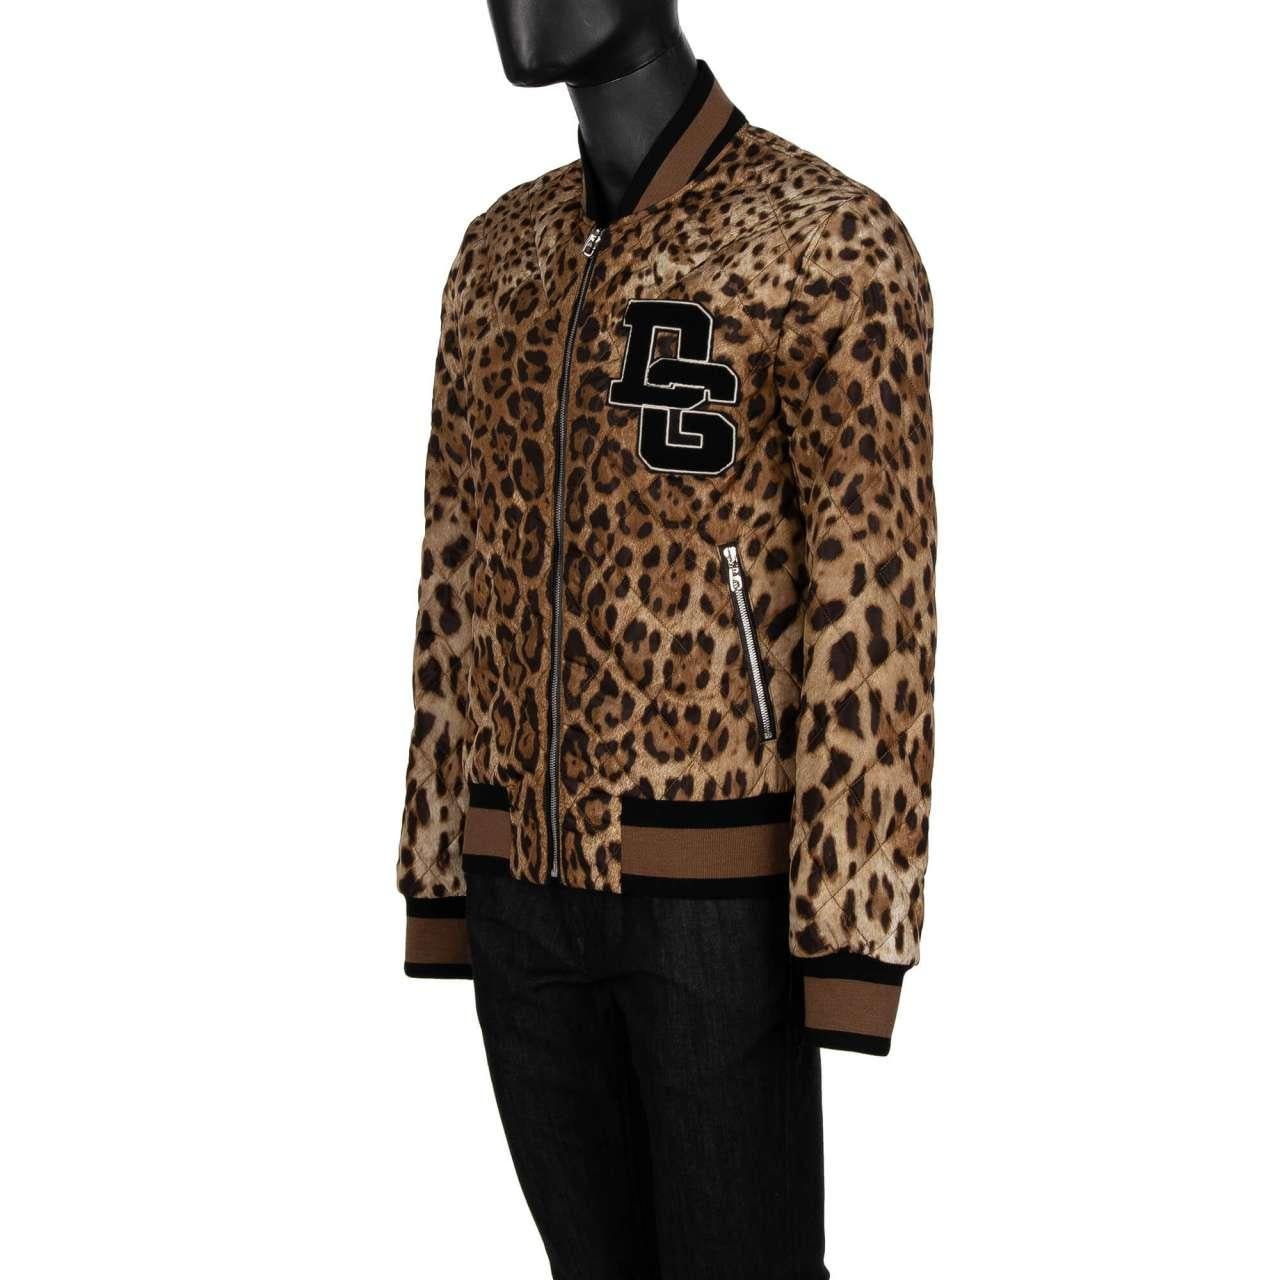 D&G Quilted Leopard Printed Nylon Bomber Jacket with DG Logo Brown Black 52 In Excellent Condition For Sale In Erkrath, DE